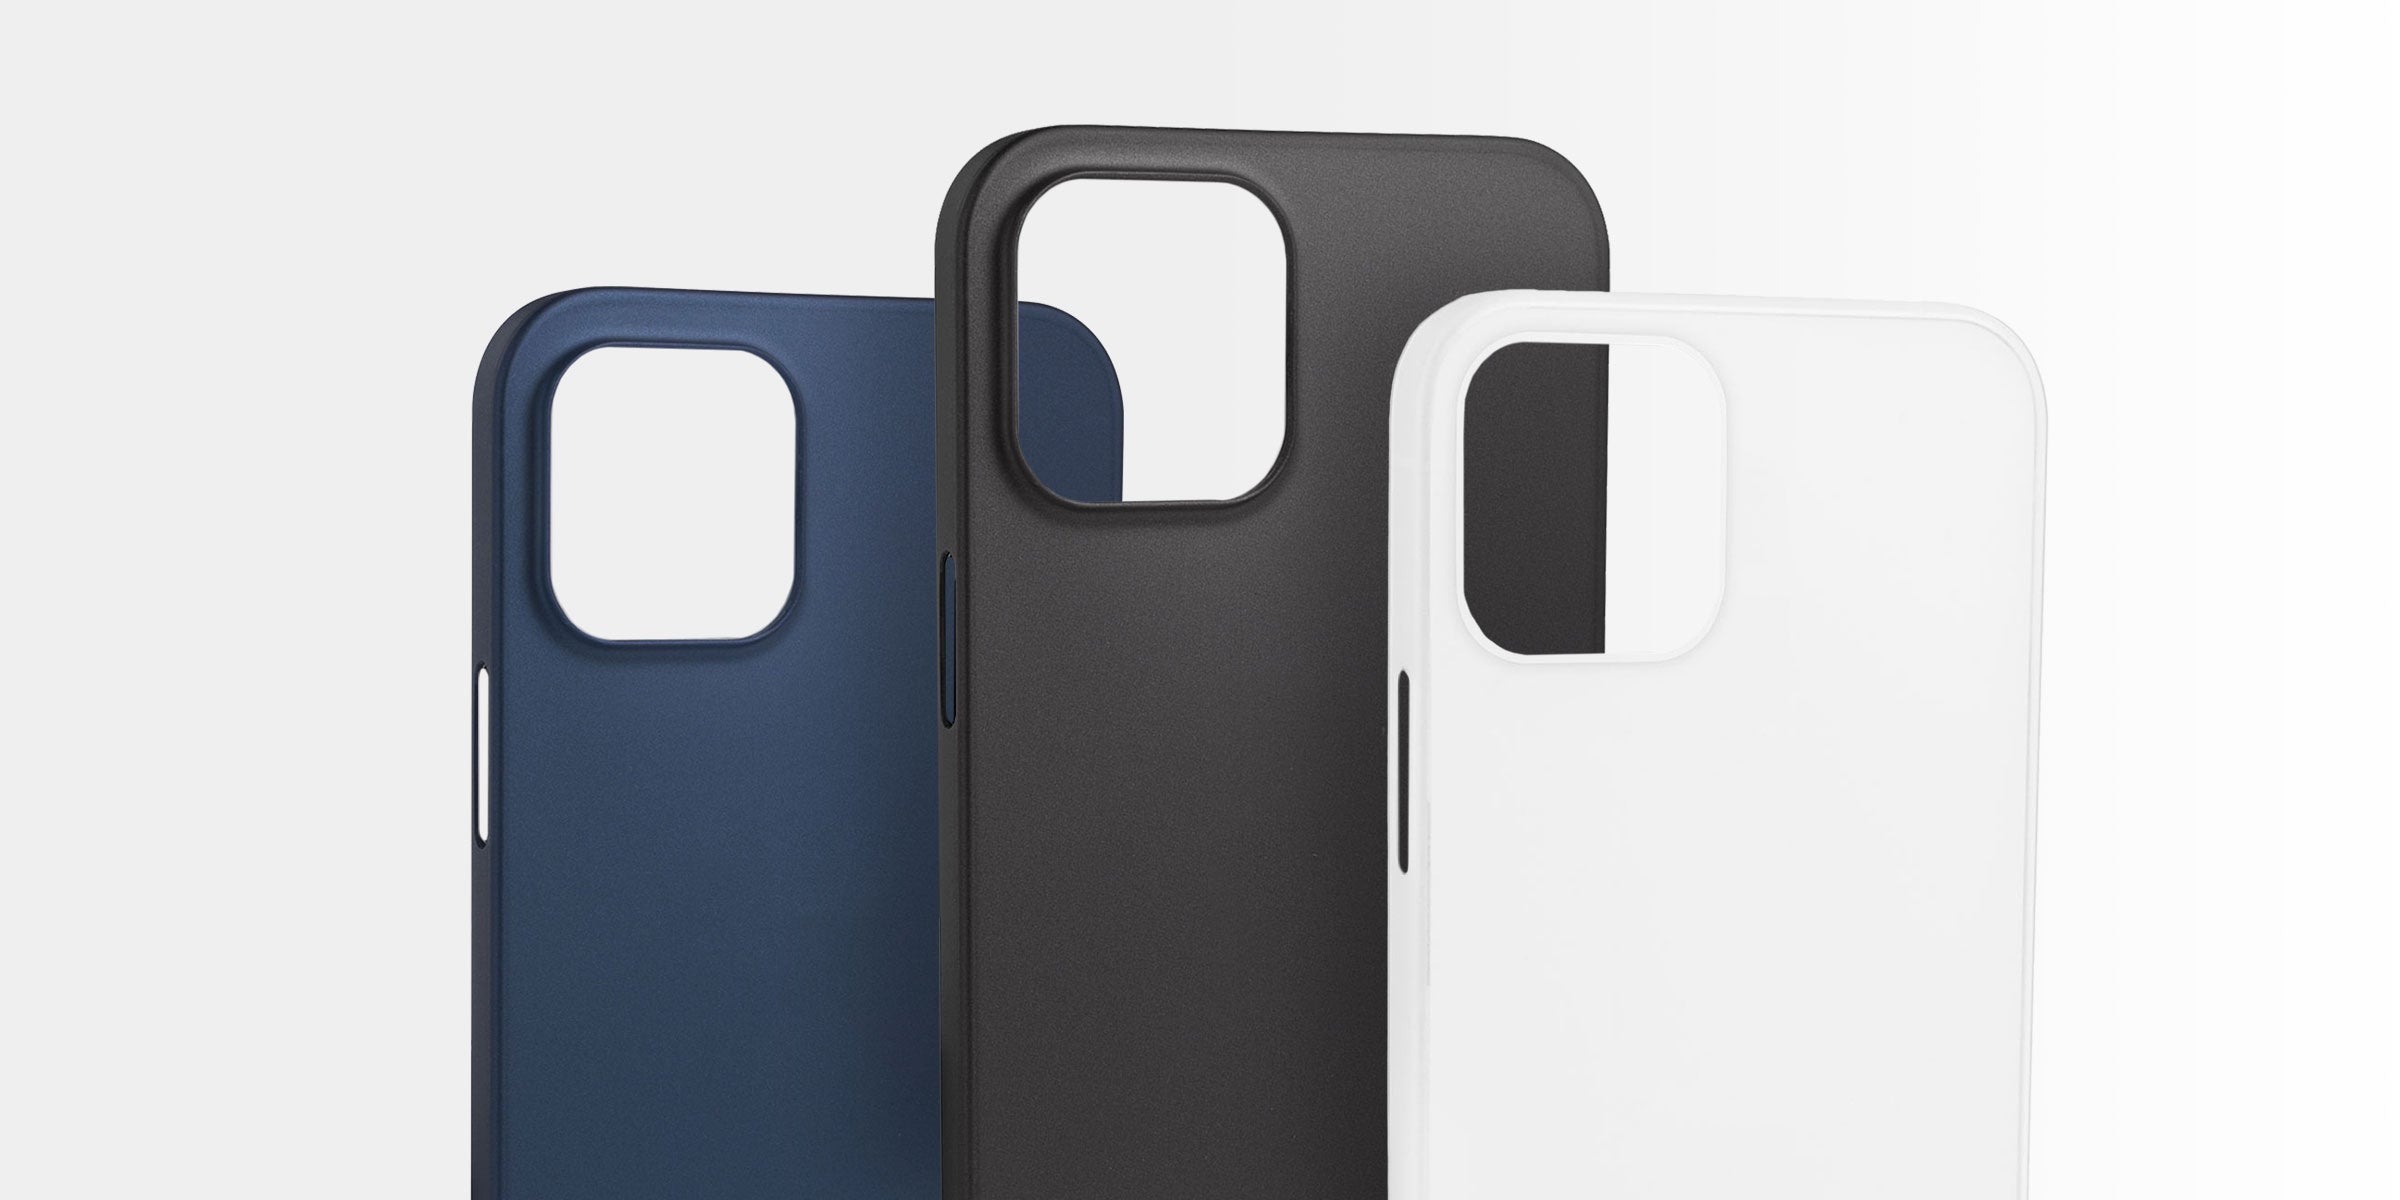 iPhone 12 series thin cases